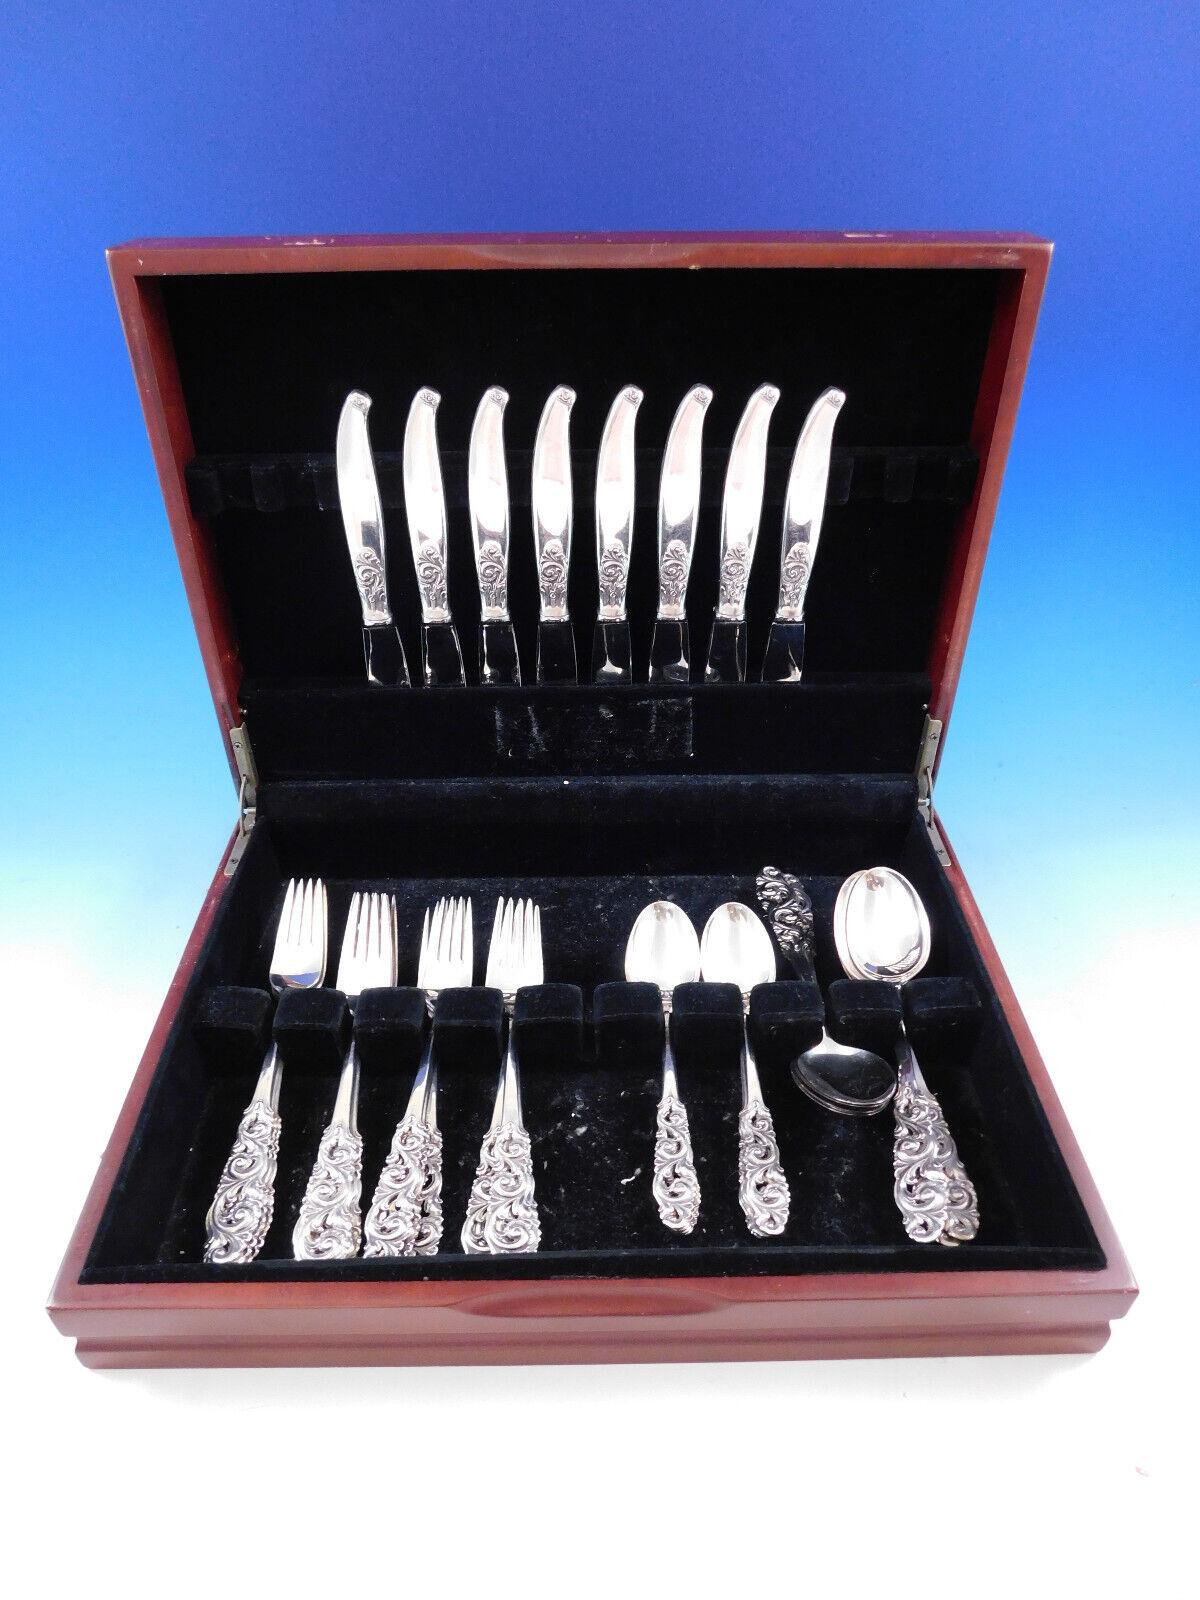 Tele by Mylius Brodrene 830 silver Norwegian Flatware set, 40 pieces. This rare set features pierced handles and includes:

8 Luncheon Knives, 8 1/4